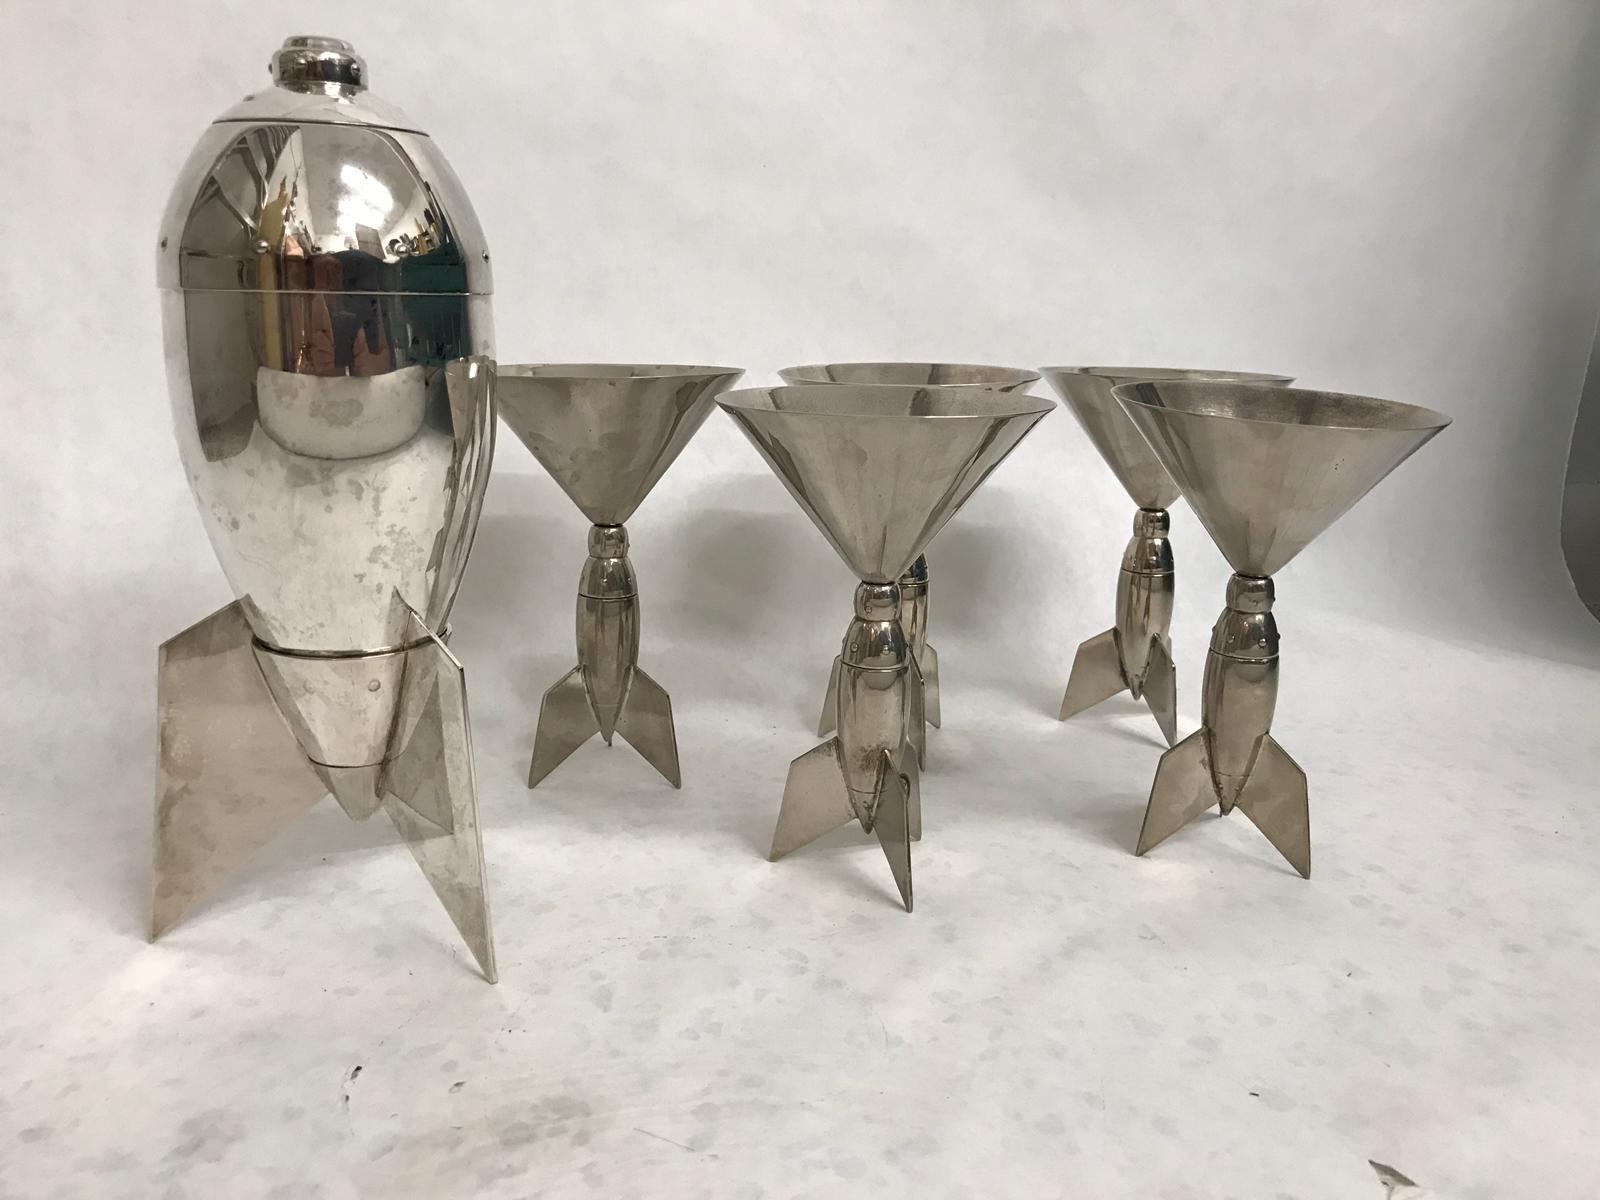 This is a beyond amazing grouping of 5 martini glasses with rocket ship design - very Cold War era and rare to find. The shaker stands on a base appearing like a rocket. Signed Godinger, very rare! Vintage and out of production.

NOTE: we also have